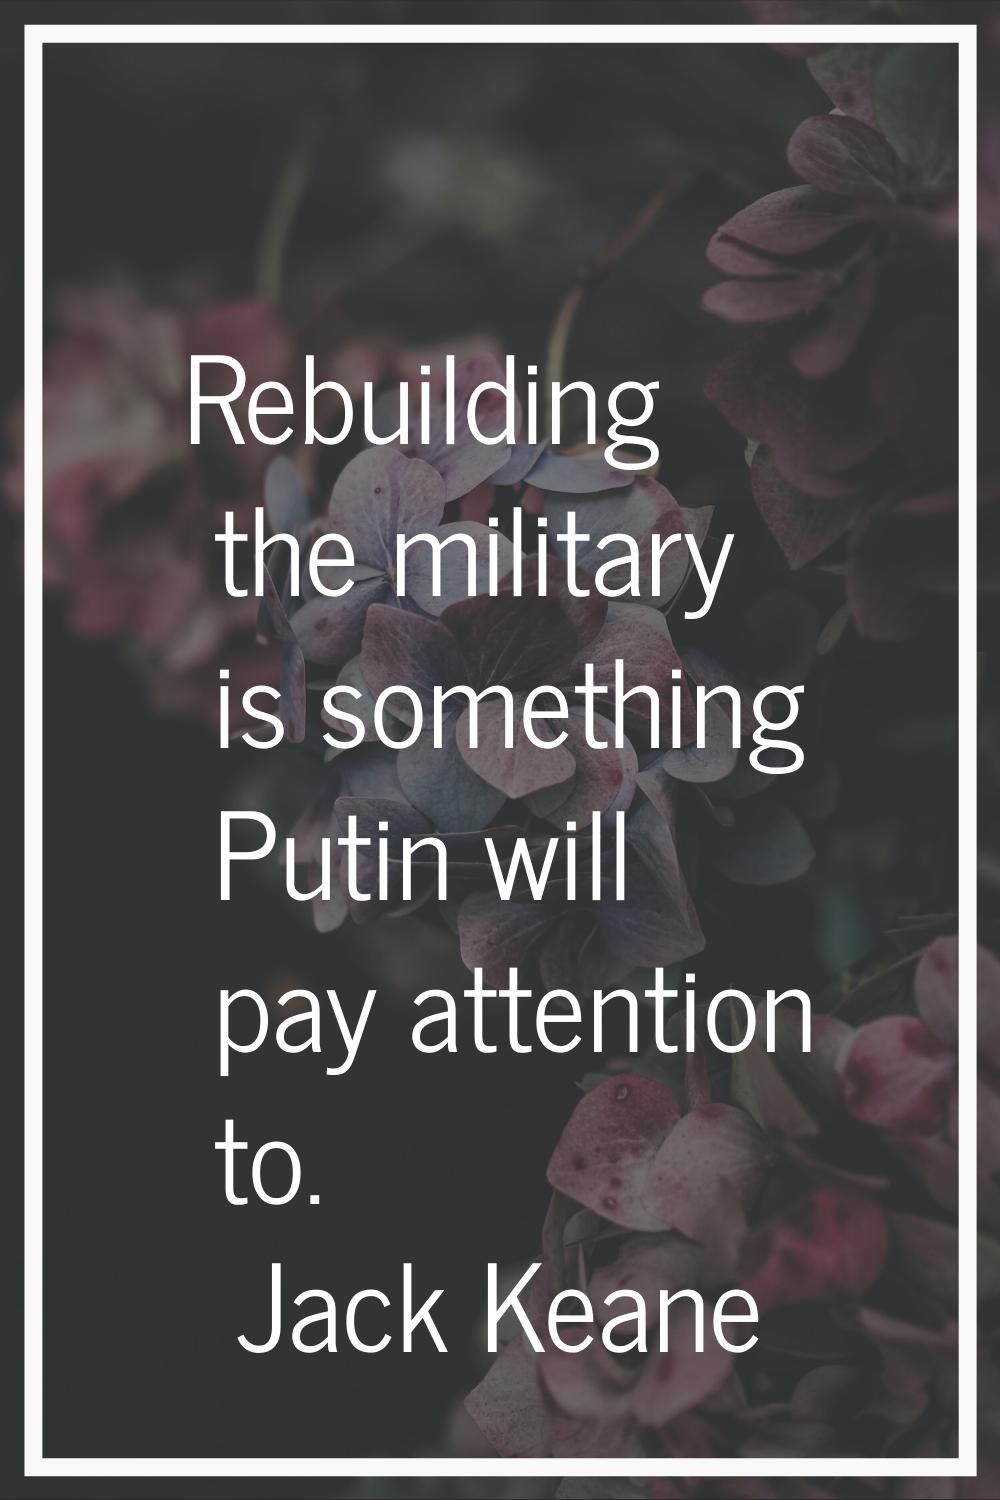 Rebuilding the military is something Putin will pay attention to.